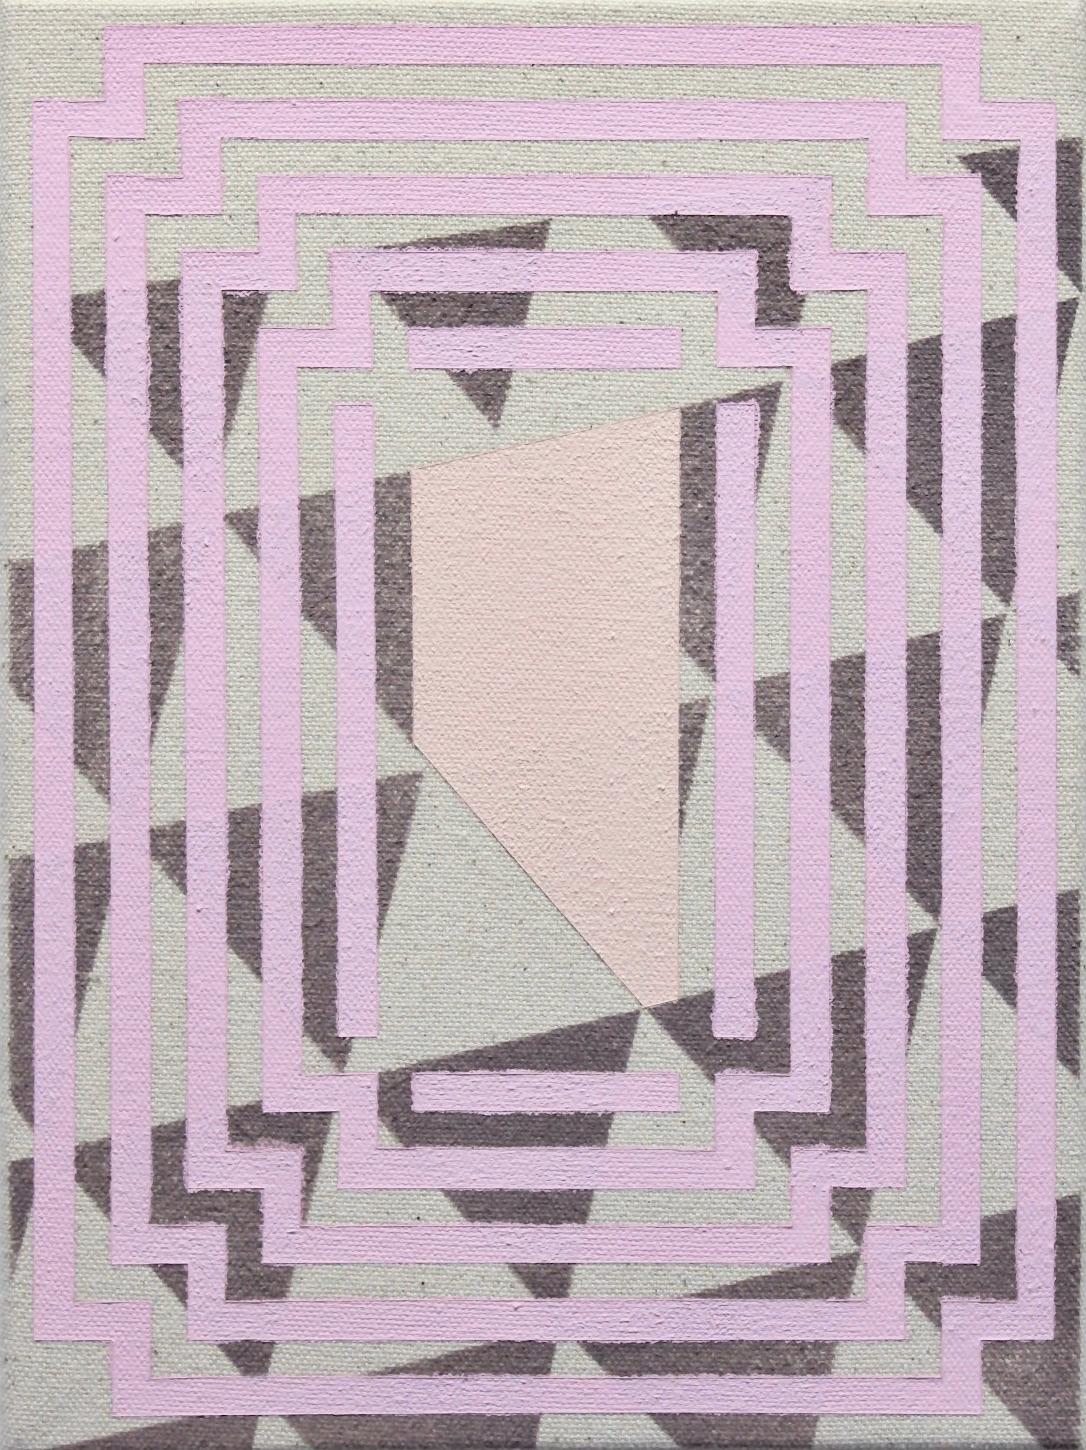 POLISHING - Abstract Geometric, Pink, Grey Painting on Canvas 